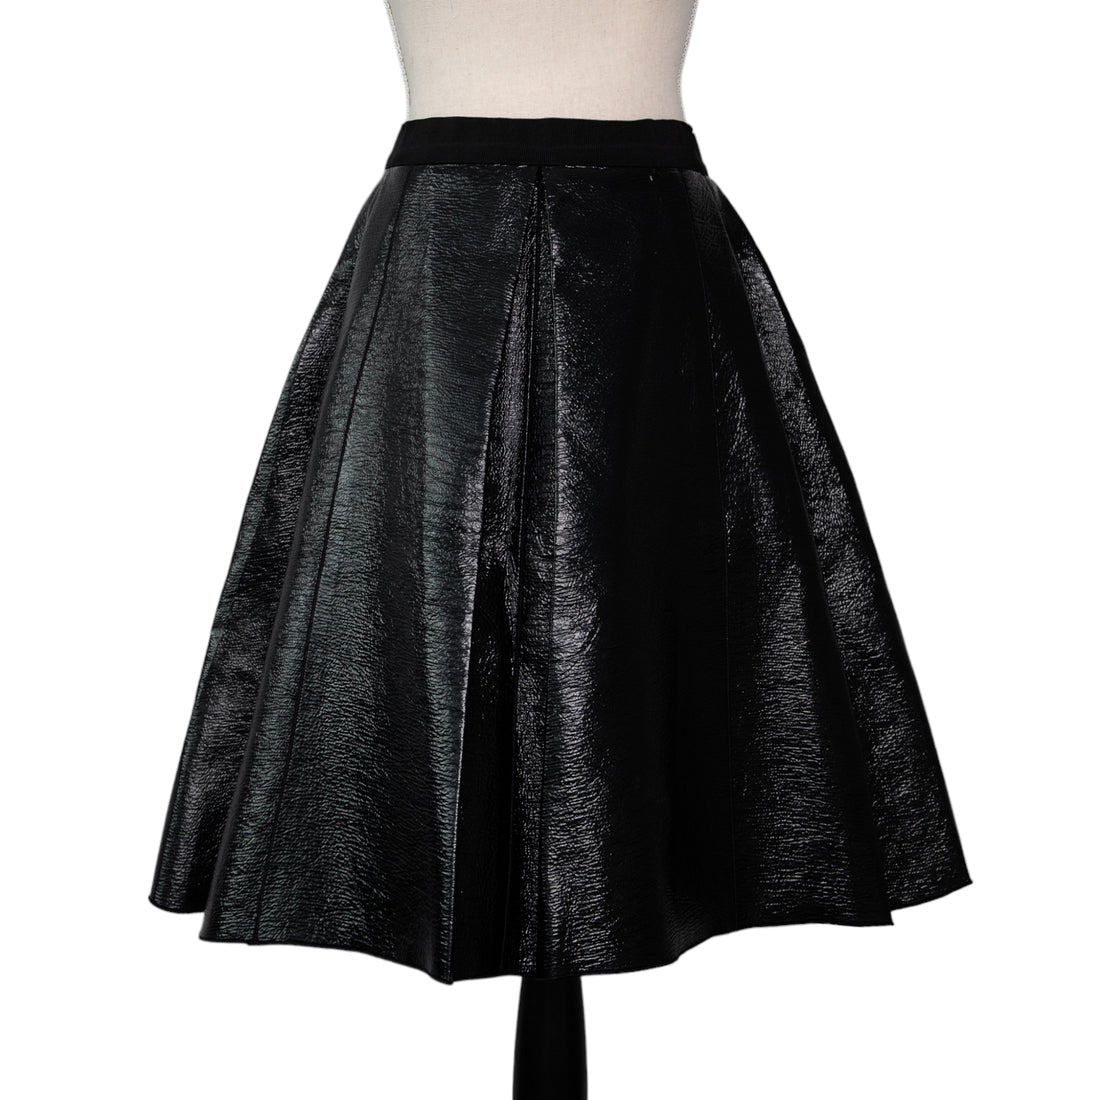 Marc Jacobs flared pleated skirt in a patent leather look